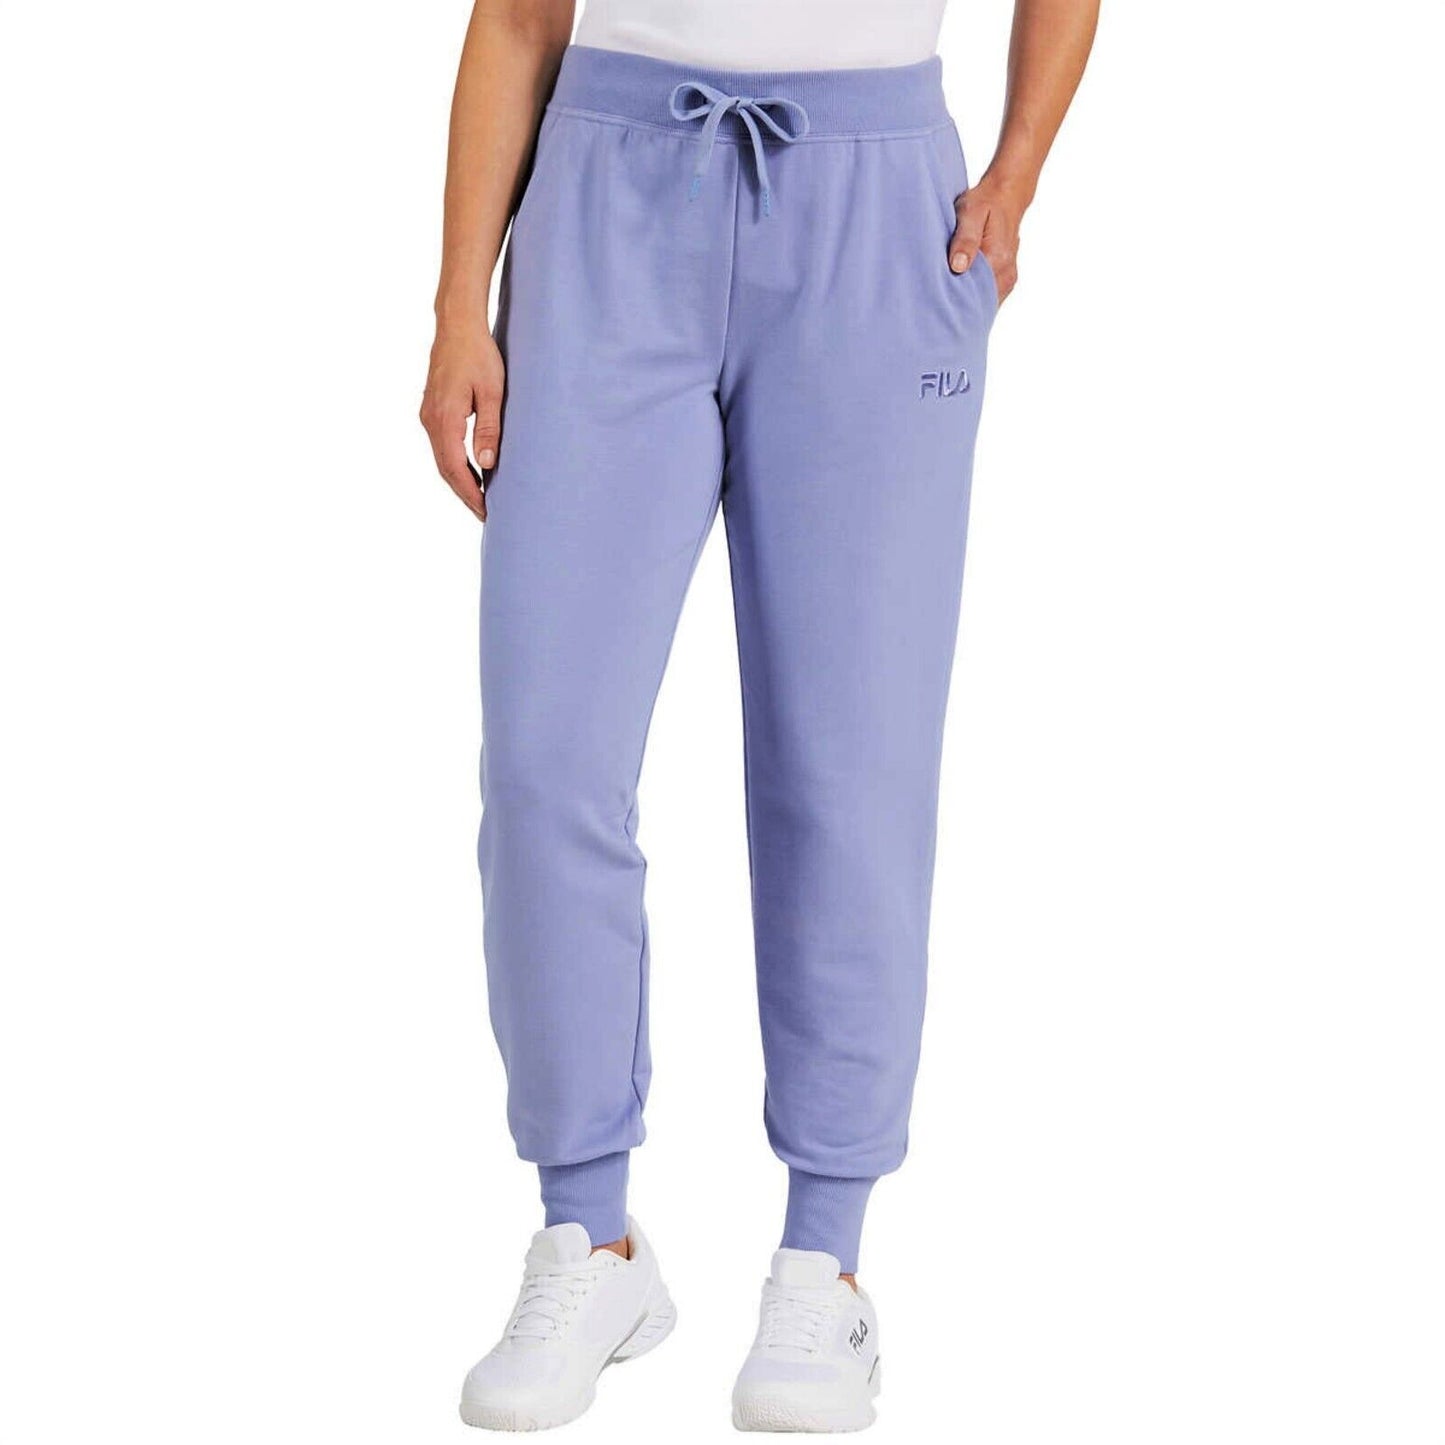 FILA Soft Cotton Blend French Terry Active Pants Joggers